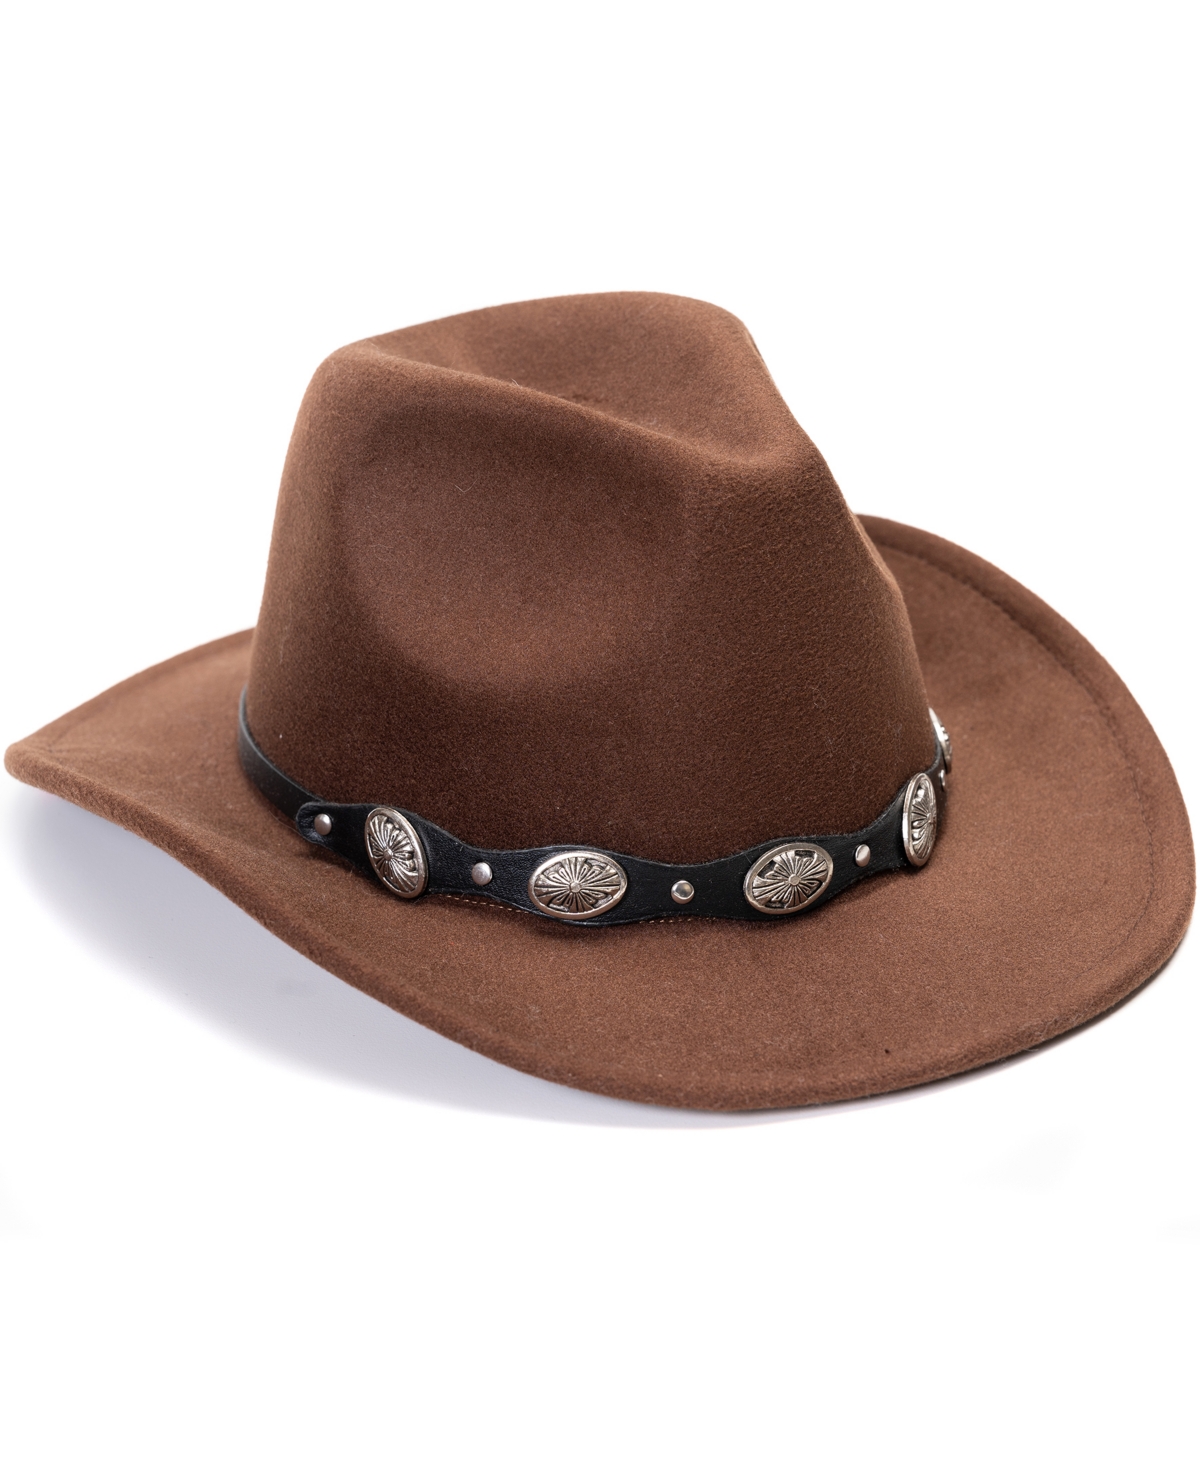 Felted Cowboy Hat with Conch Belt - Chocolate